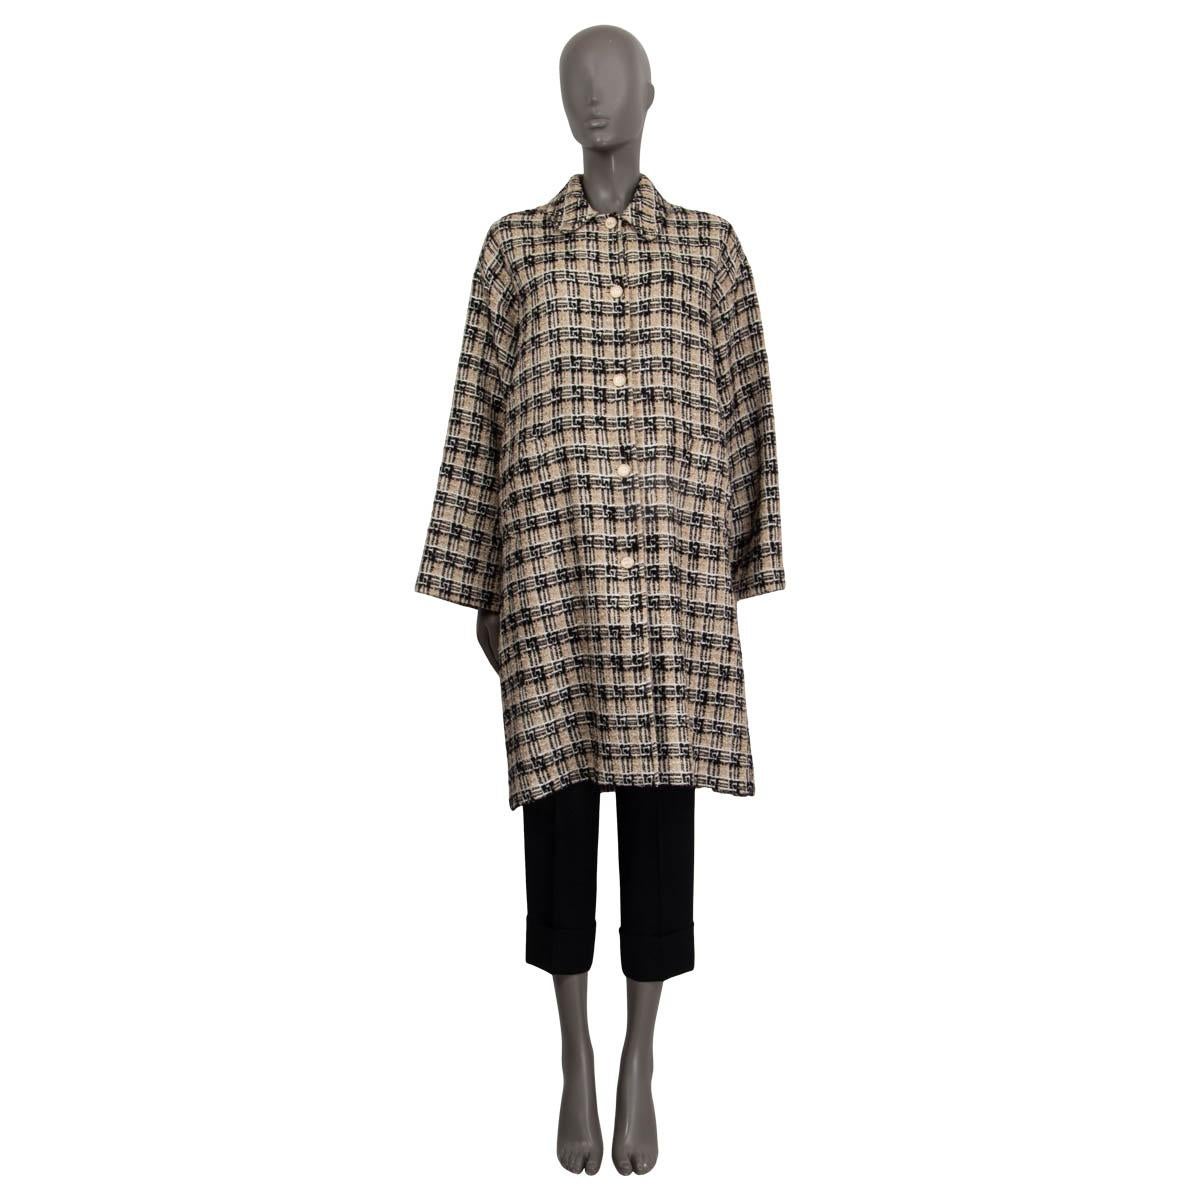 100% authentic Gucci square G check tweed coat in black and beige cotton (24%), wool (23%), polyester (20%) and acrylic (19%). Features a classic collar and two slit pockets on the front. Opens with five 'GG' buttons on the front. Lined in black